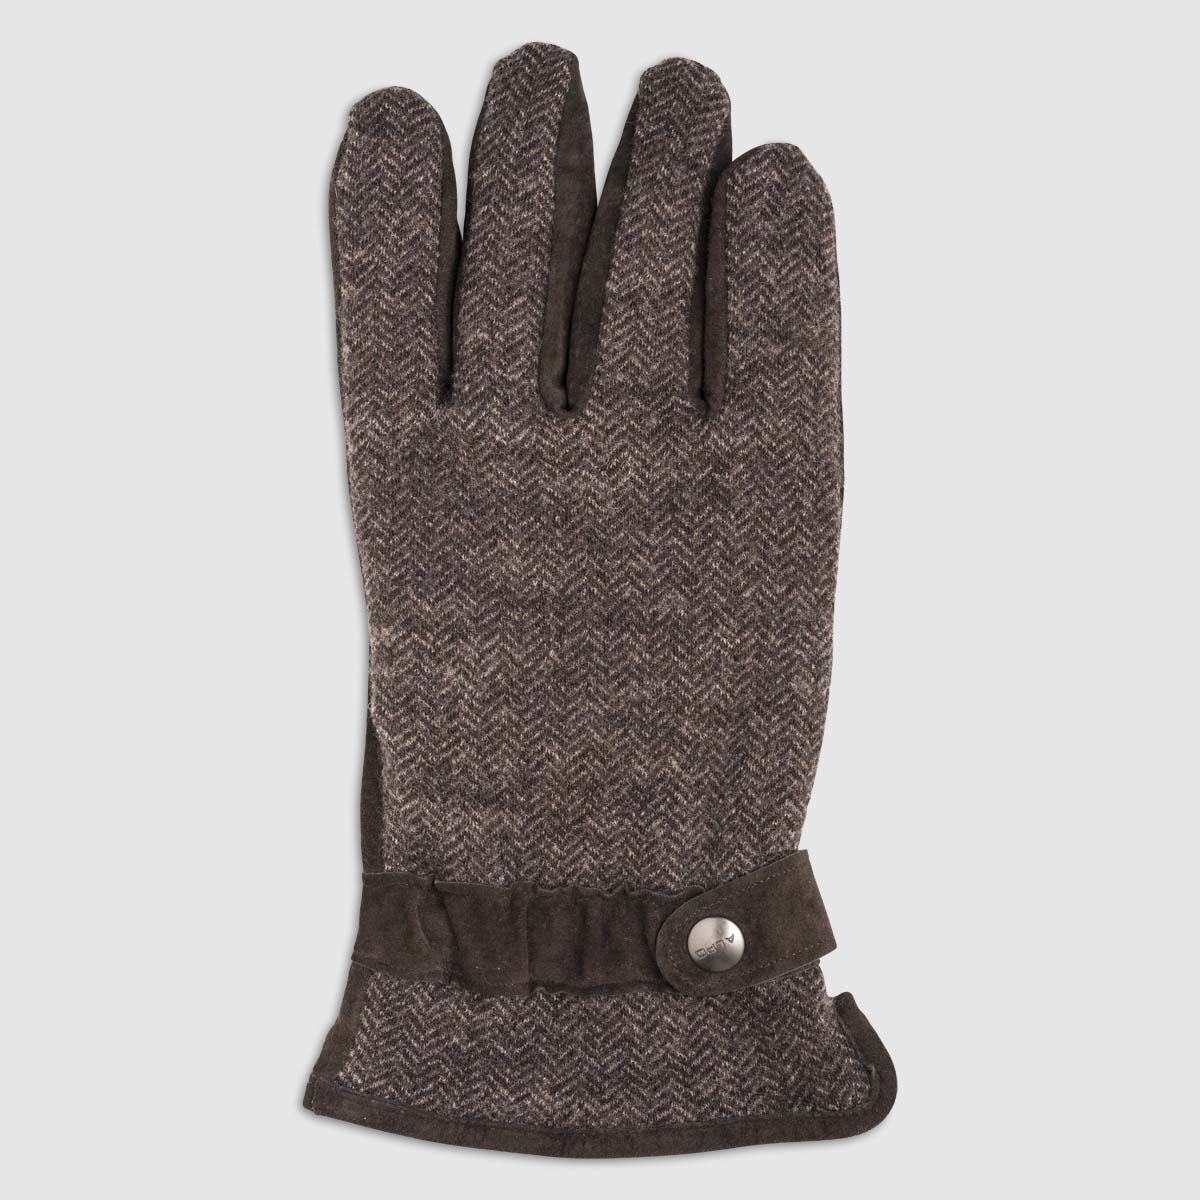 Wool Glove with Leather Palm and Fleece Lining in Moro – XL